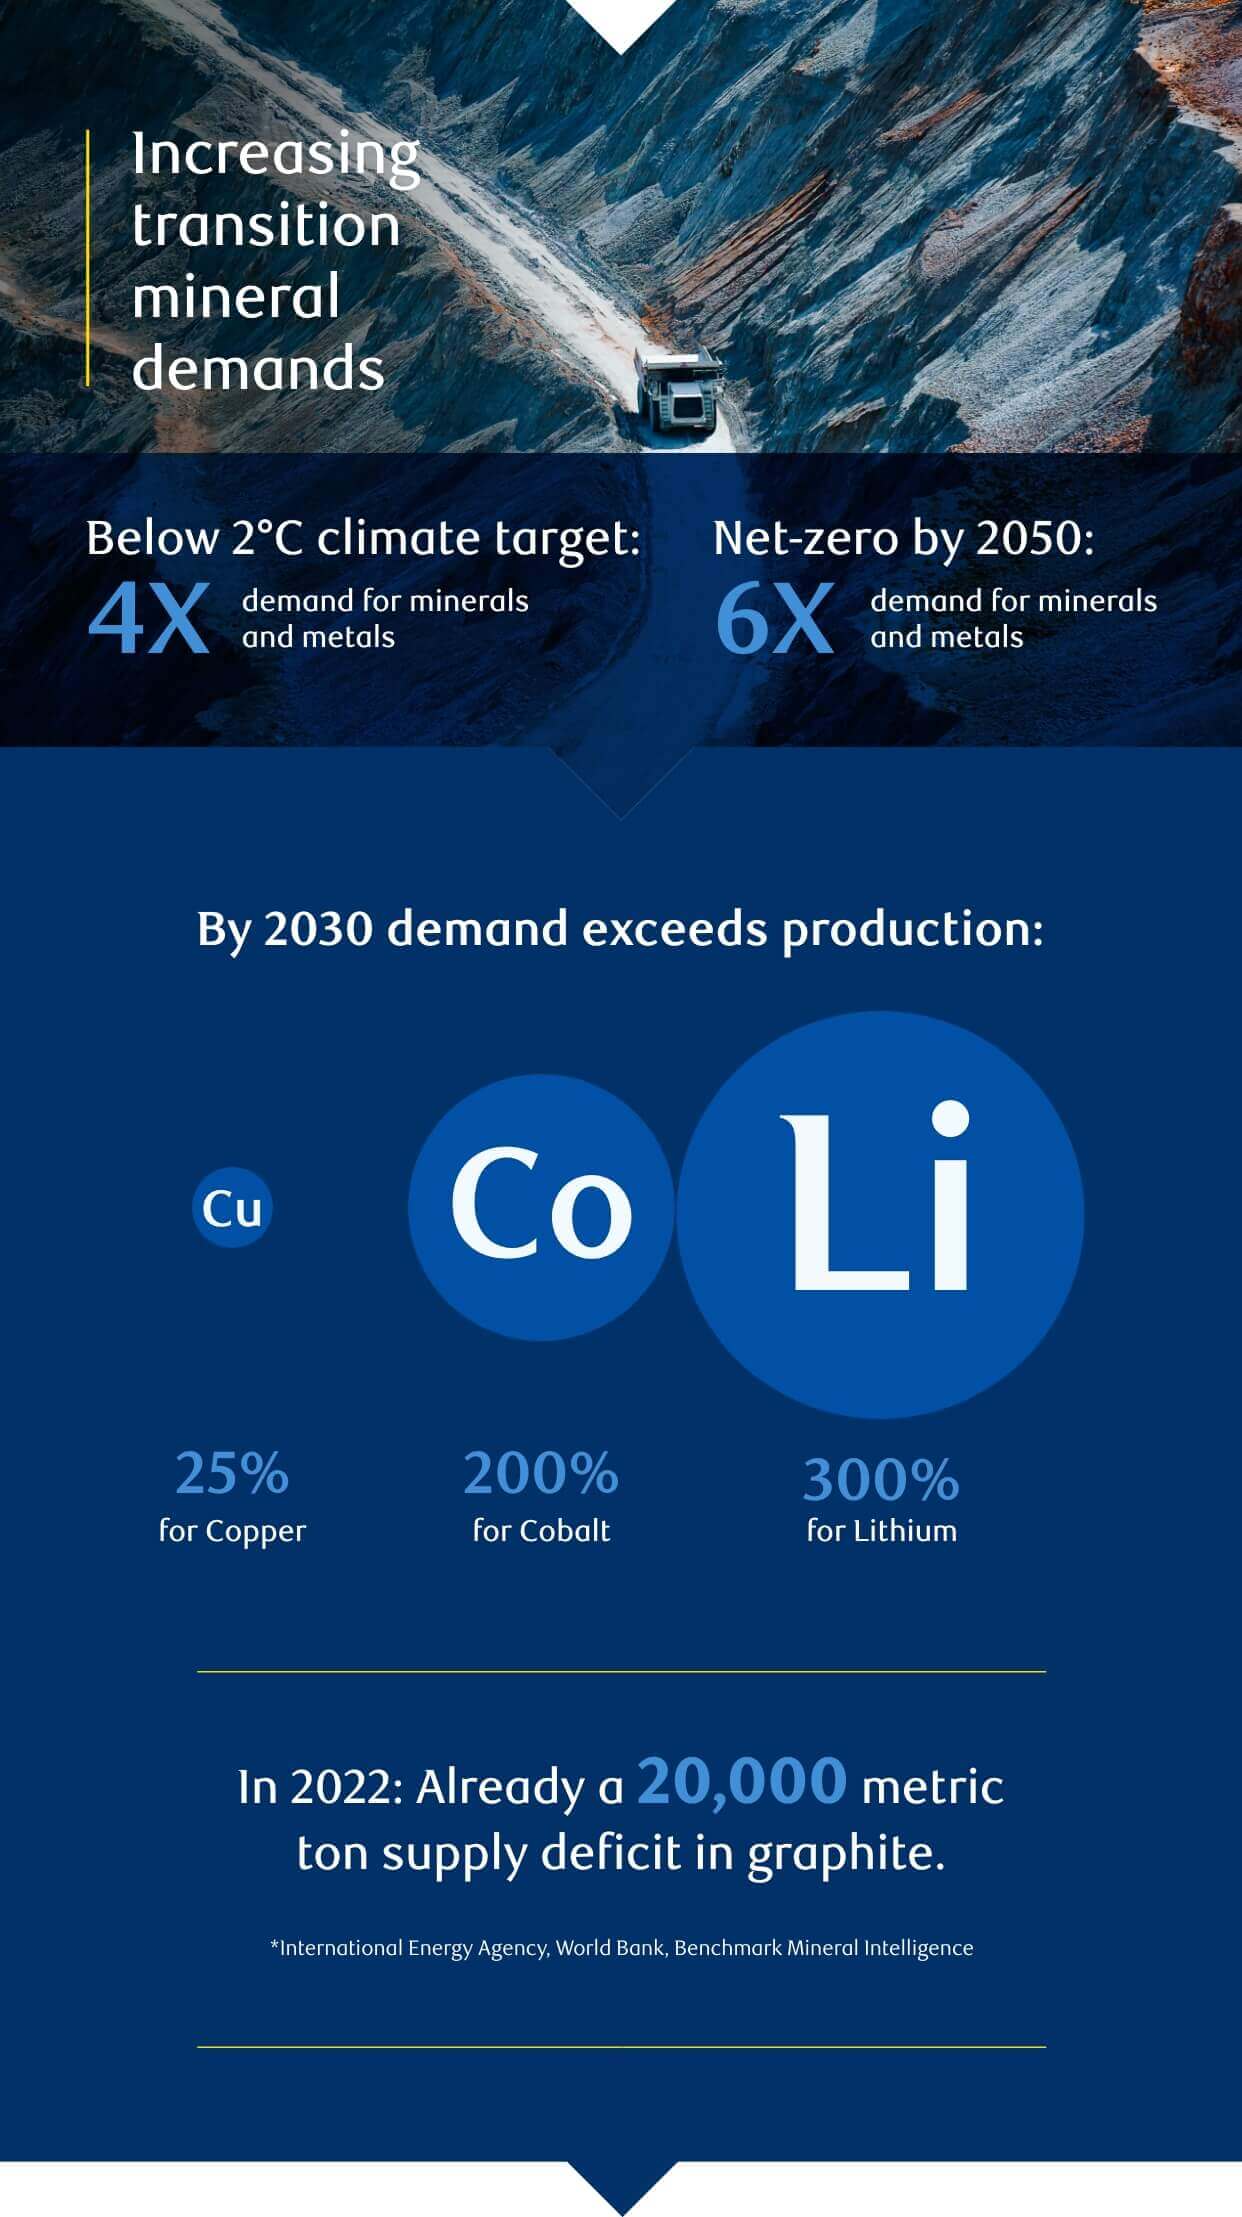 Increasing transition mineral demands - infographic